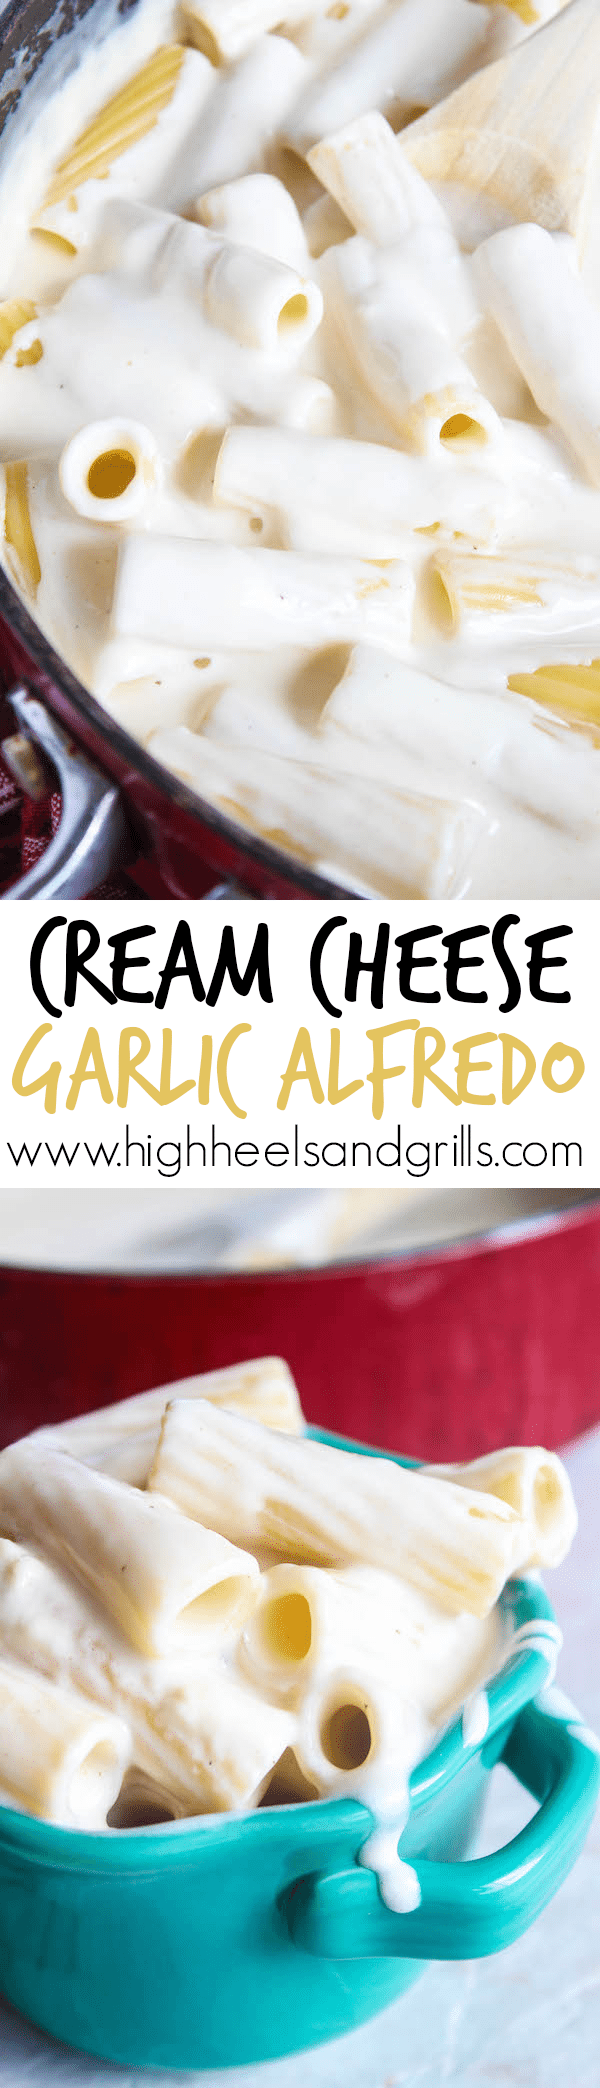 Cream Cheese Garlic Alfredo - The easiest alfredo I have ever made and tastes better than any restaurant alfredo!